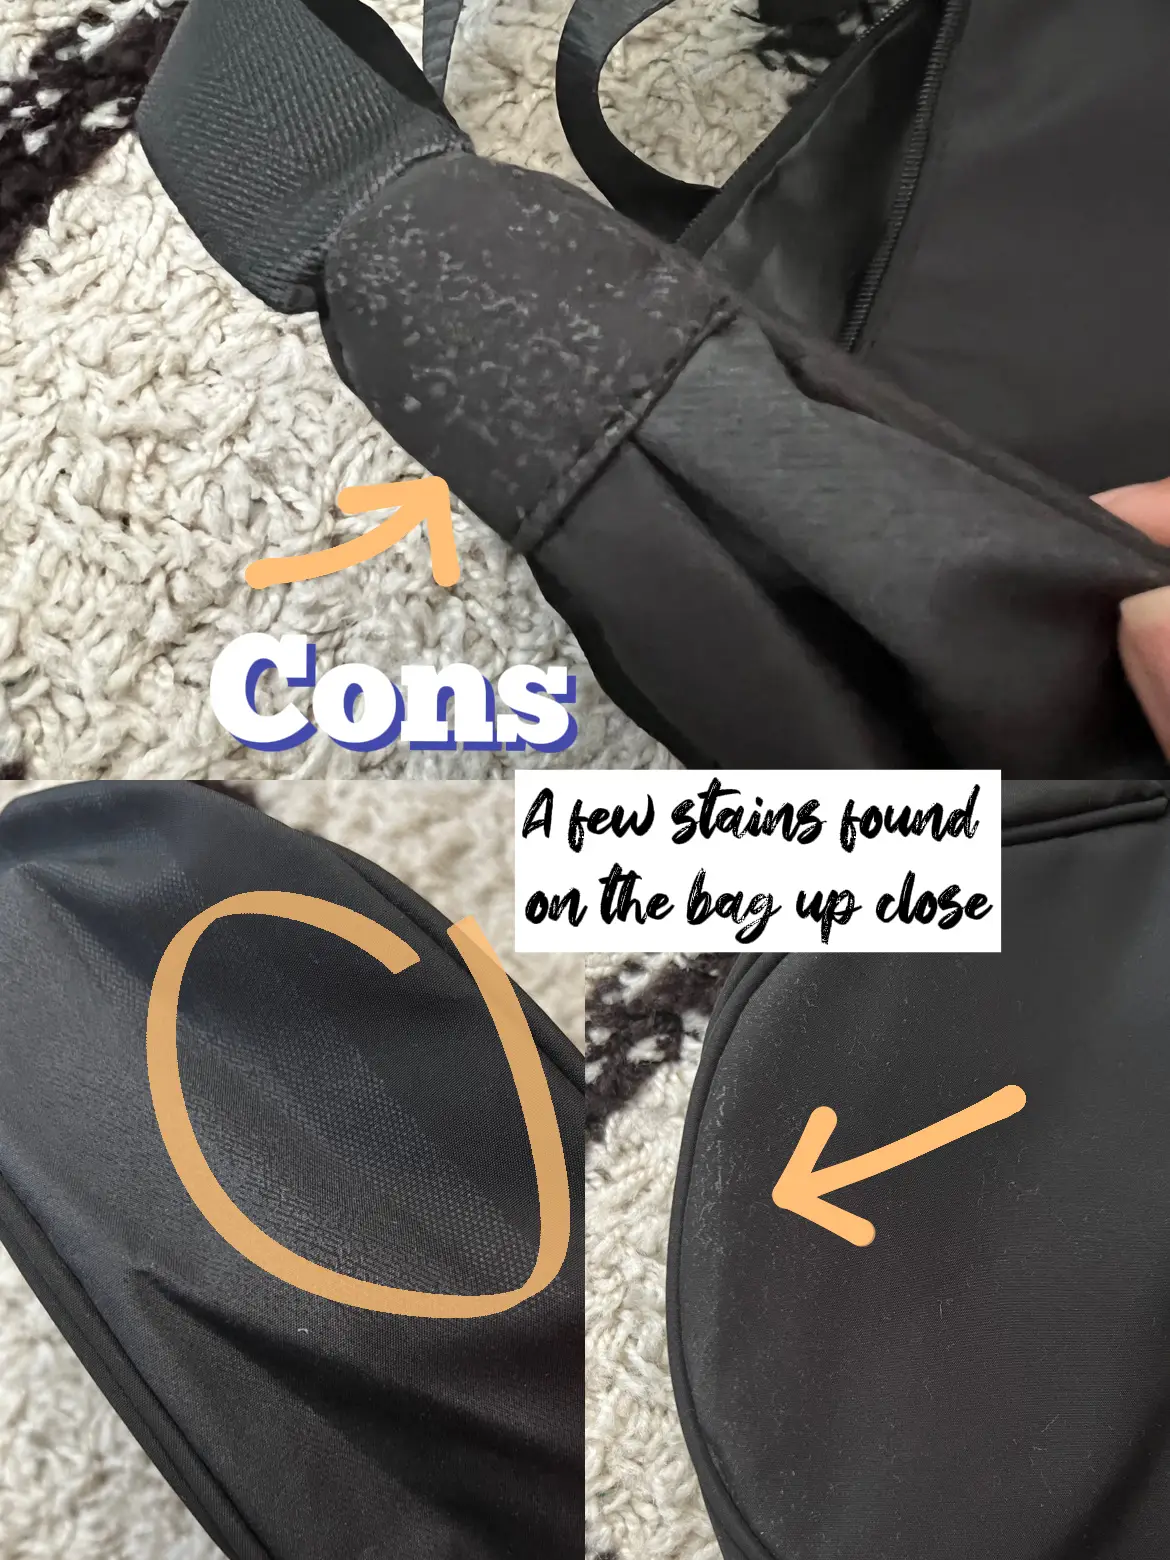 Review of SHEIN's dupe of the viral uniqlo bag!